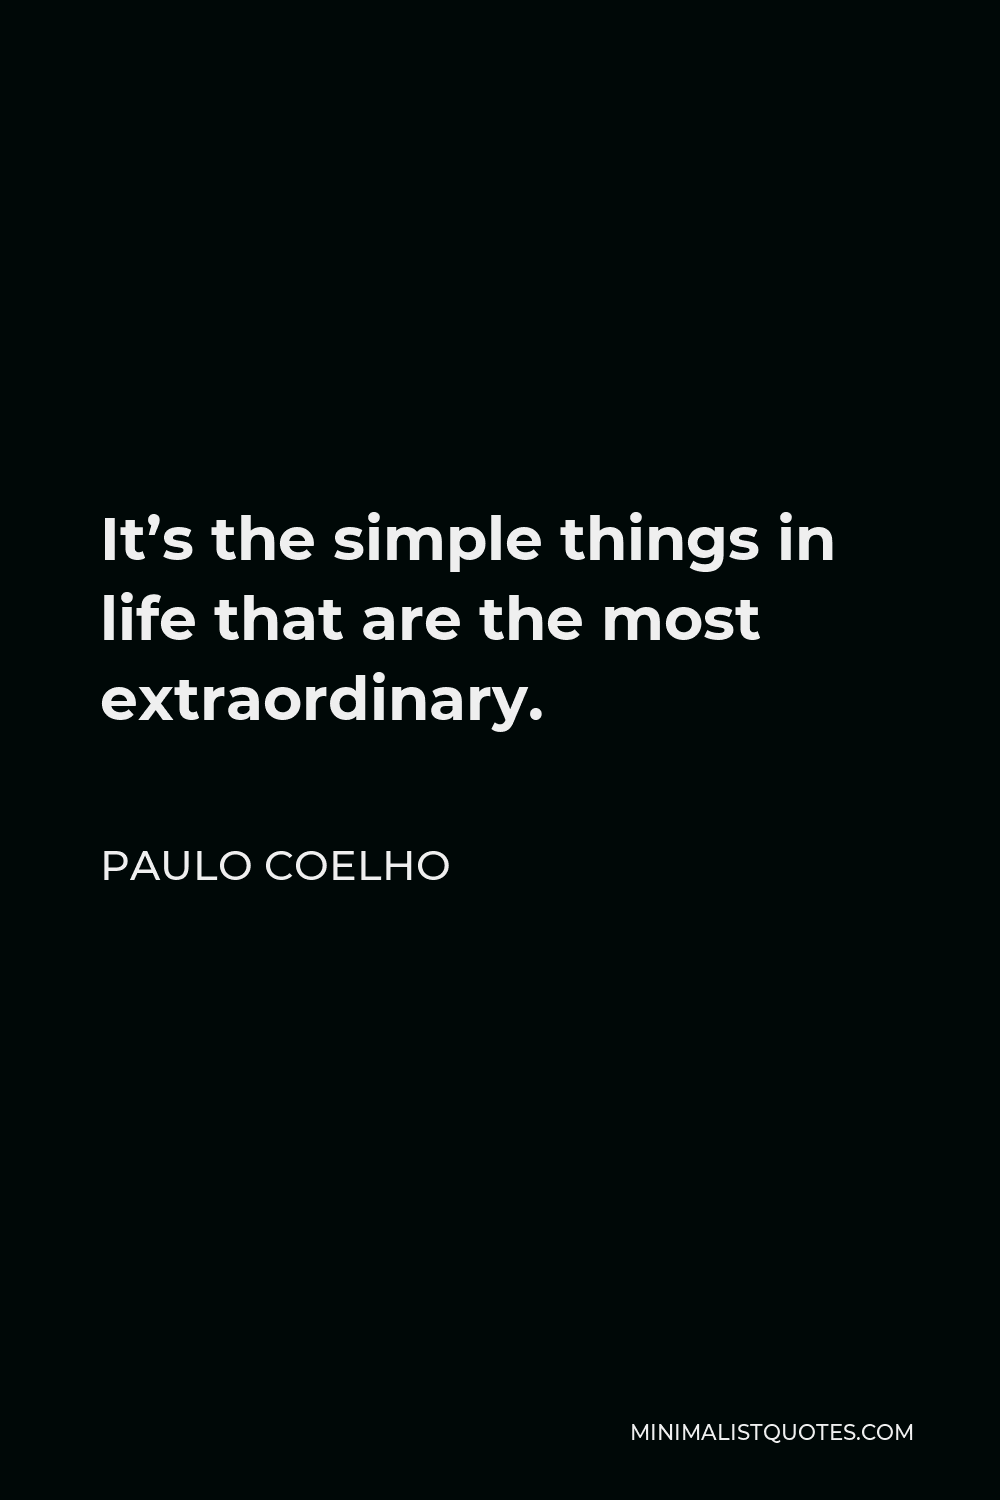 Paulo Coelho Quote - It’s the simple things in life that are the most extraordinary.